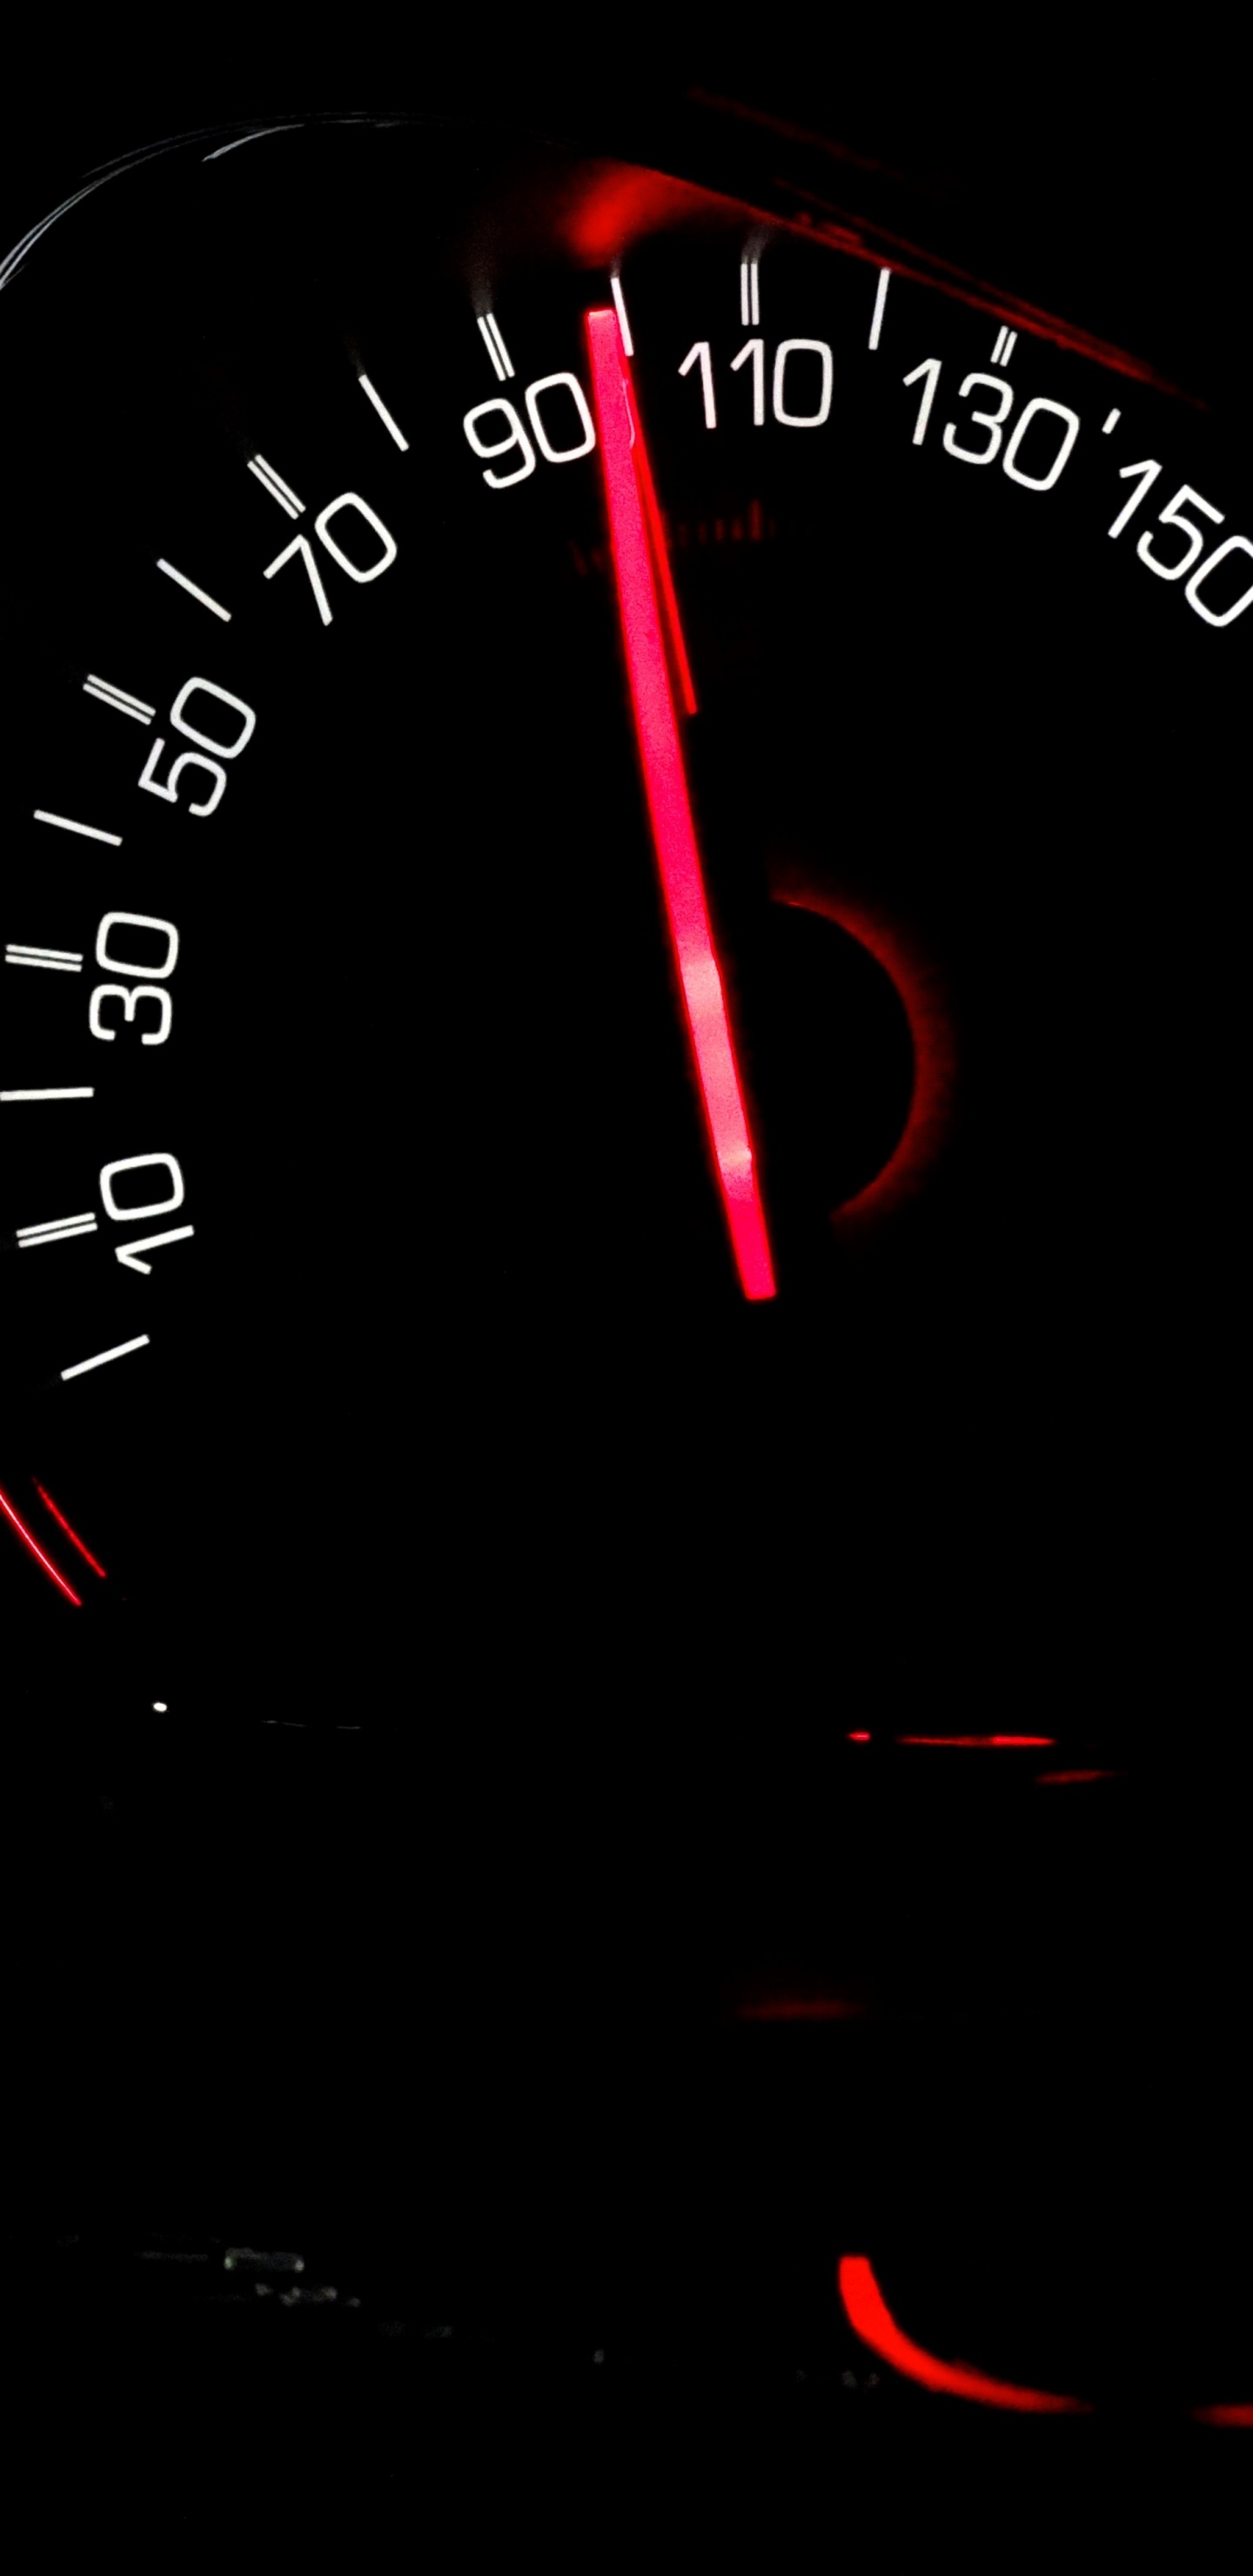 Black and Red Speedometer at 0. Wallpaper in 1440x2960 Resolution